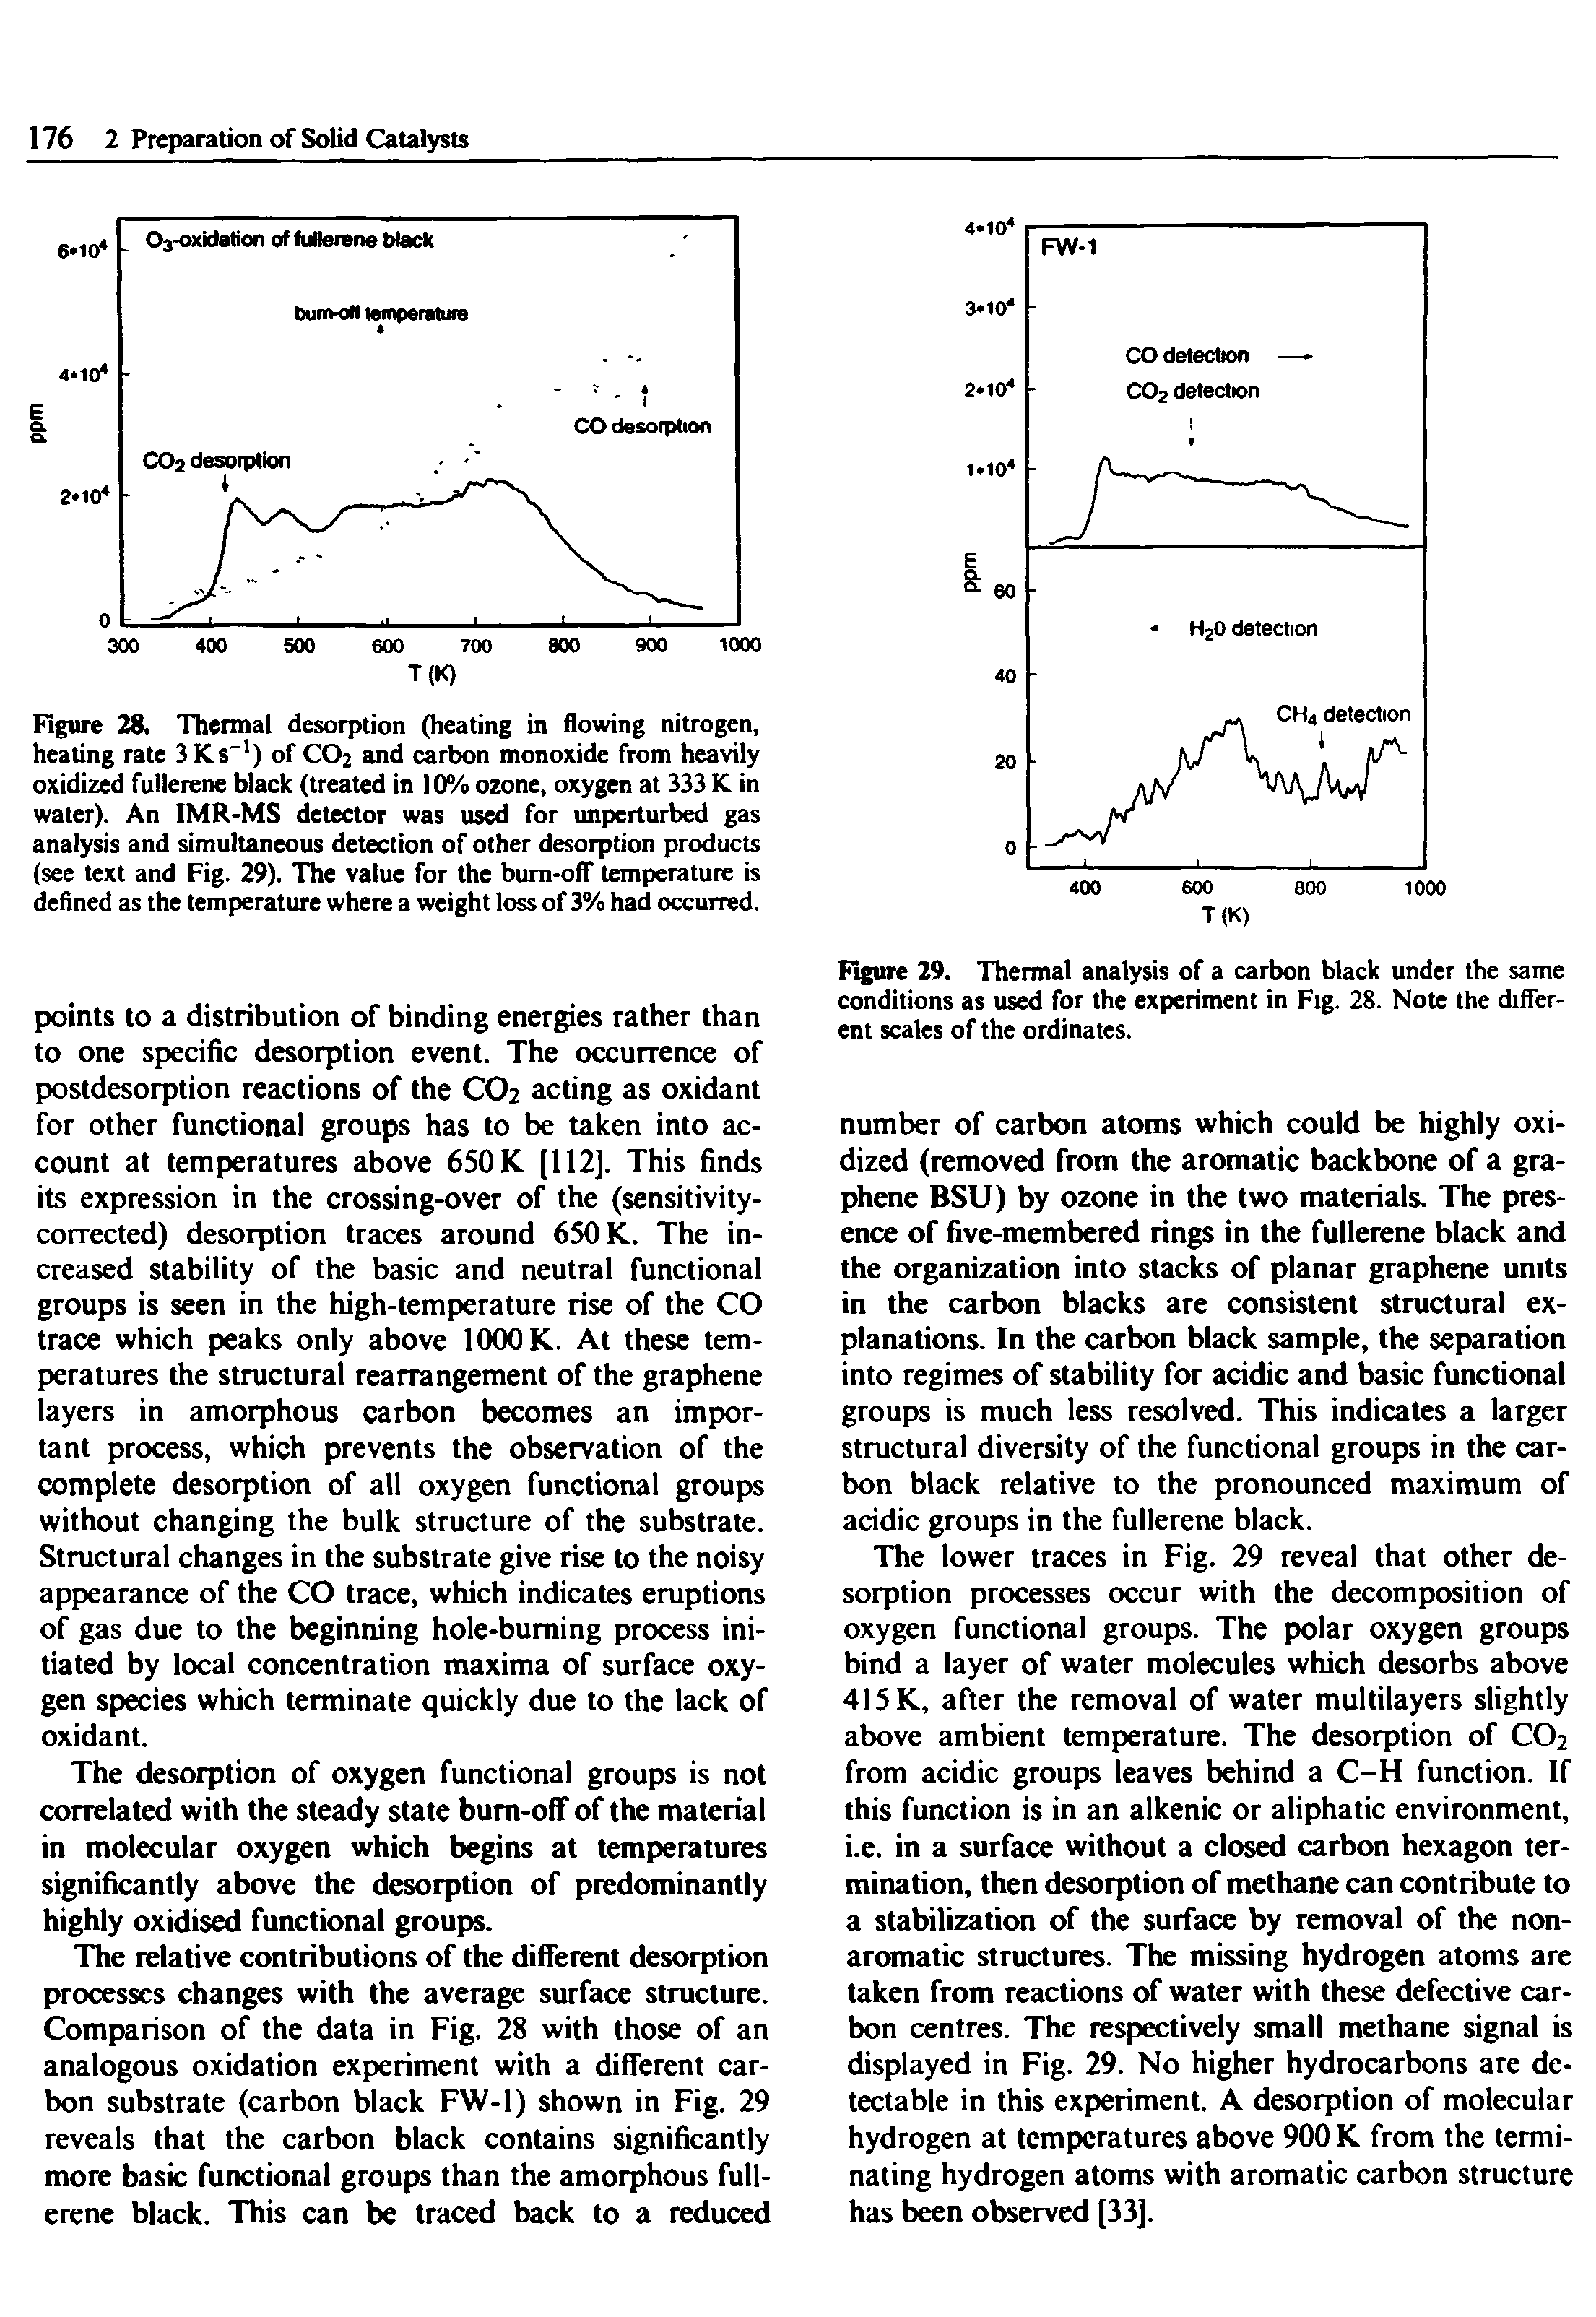 Figure 28. Thermal desorption (heating in flowing nitrogen, heating rate 3Ks 1) of CO2 and carbon monoxide from heavily oxidized fullerene black (treated in 10% ozone, oxygen at 333 K. in water). An IMR-MS detector was used for unperturbed gas analysis and simultaneous detection of other desorption products (see text and Fig. 29). The value for the bum-off temperature is defined as the temperature where a weight loss of 3% had occurred.